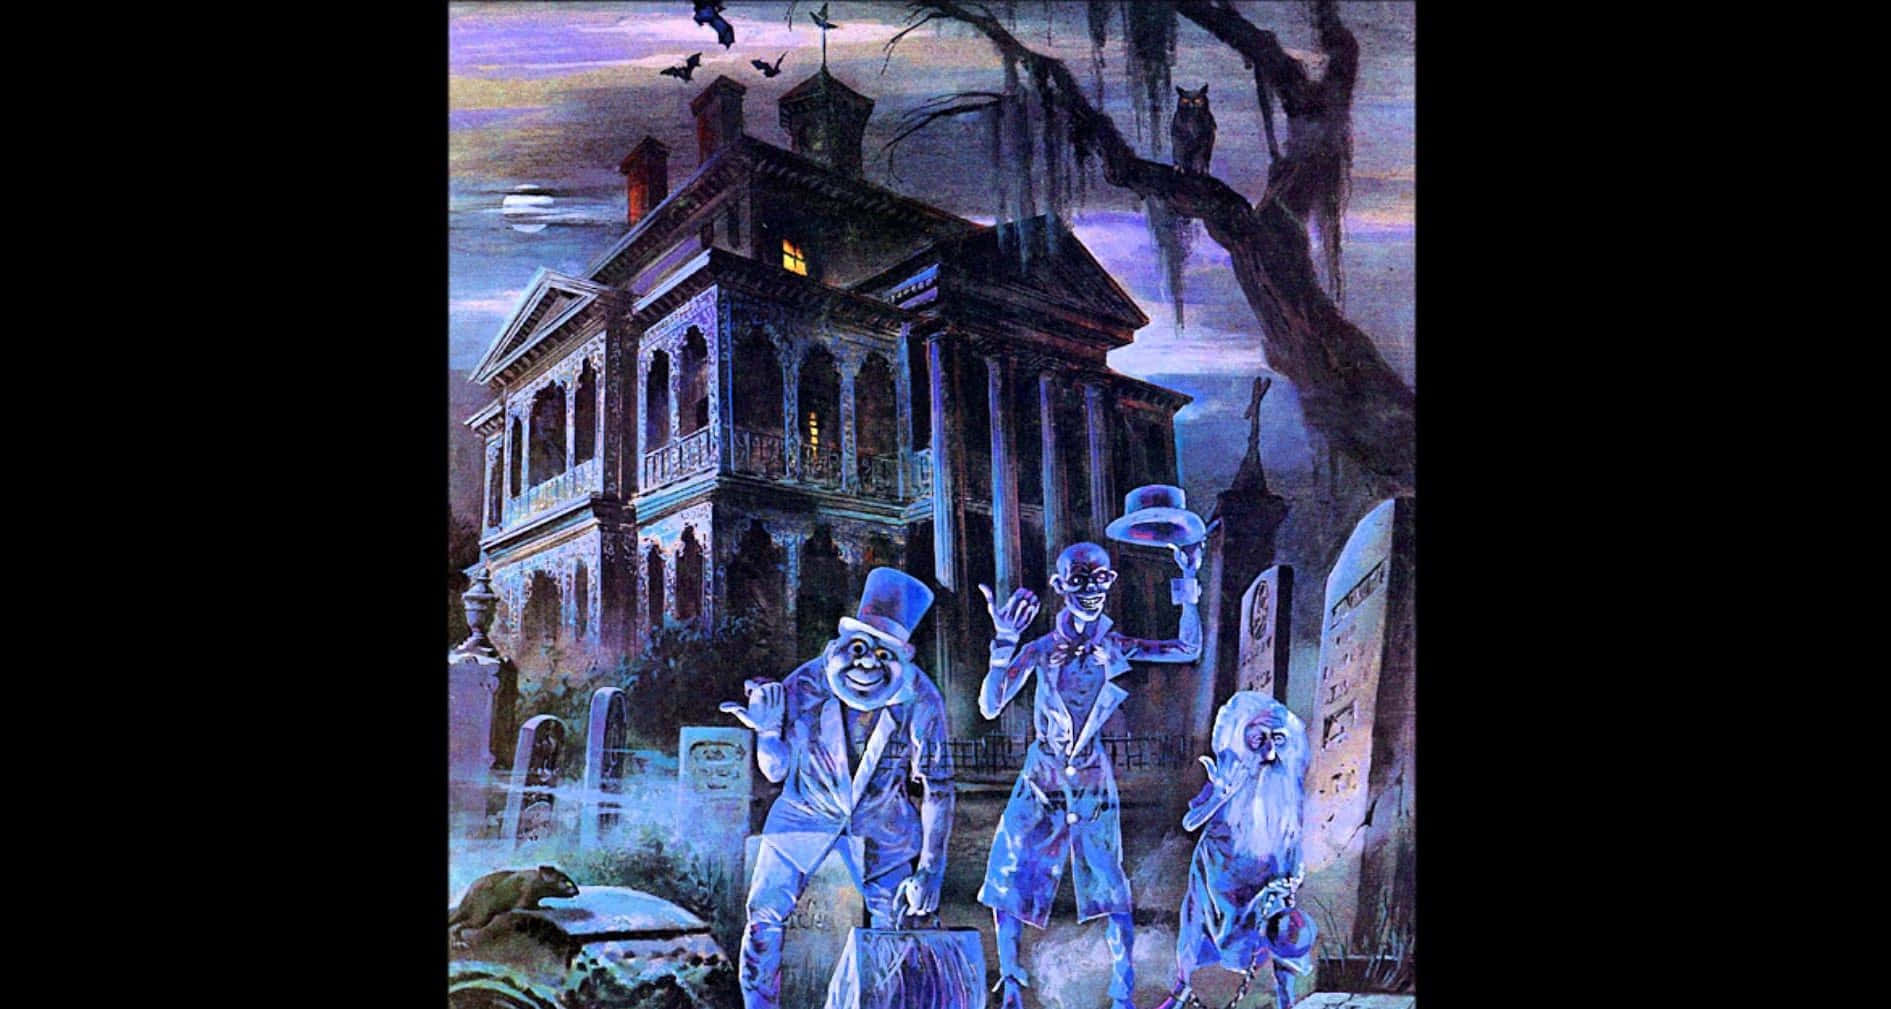 Explore the mysteries of the Haunted Mansion